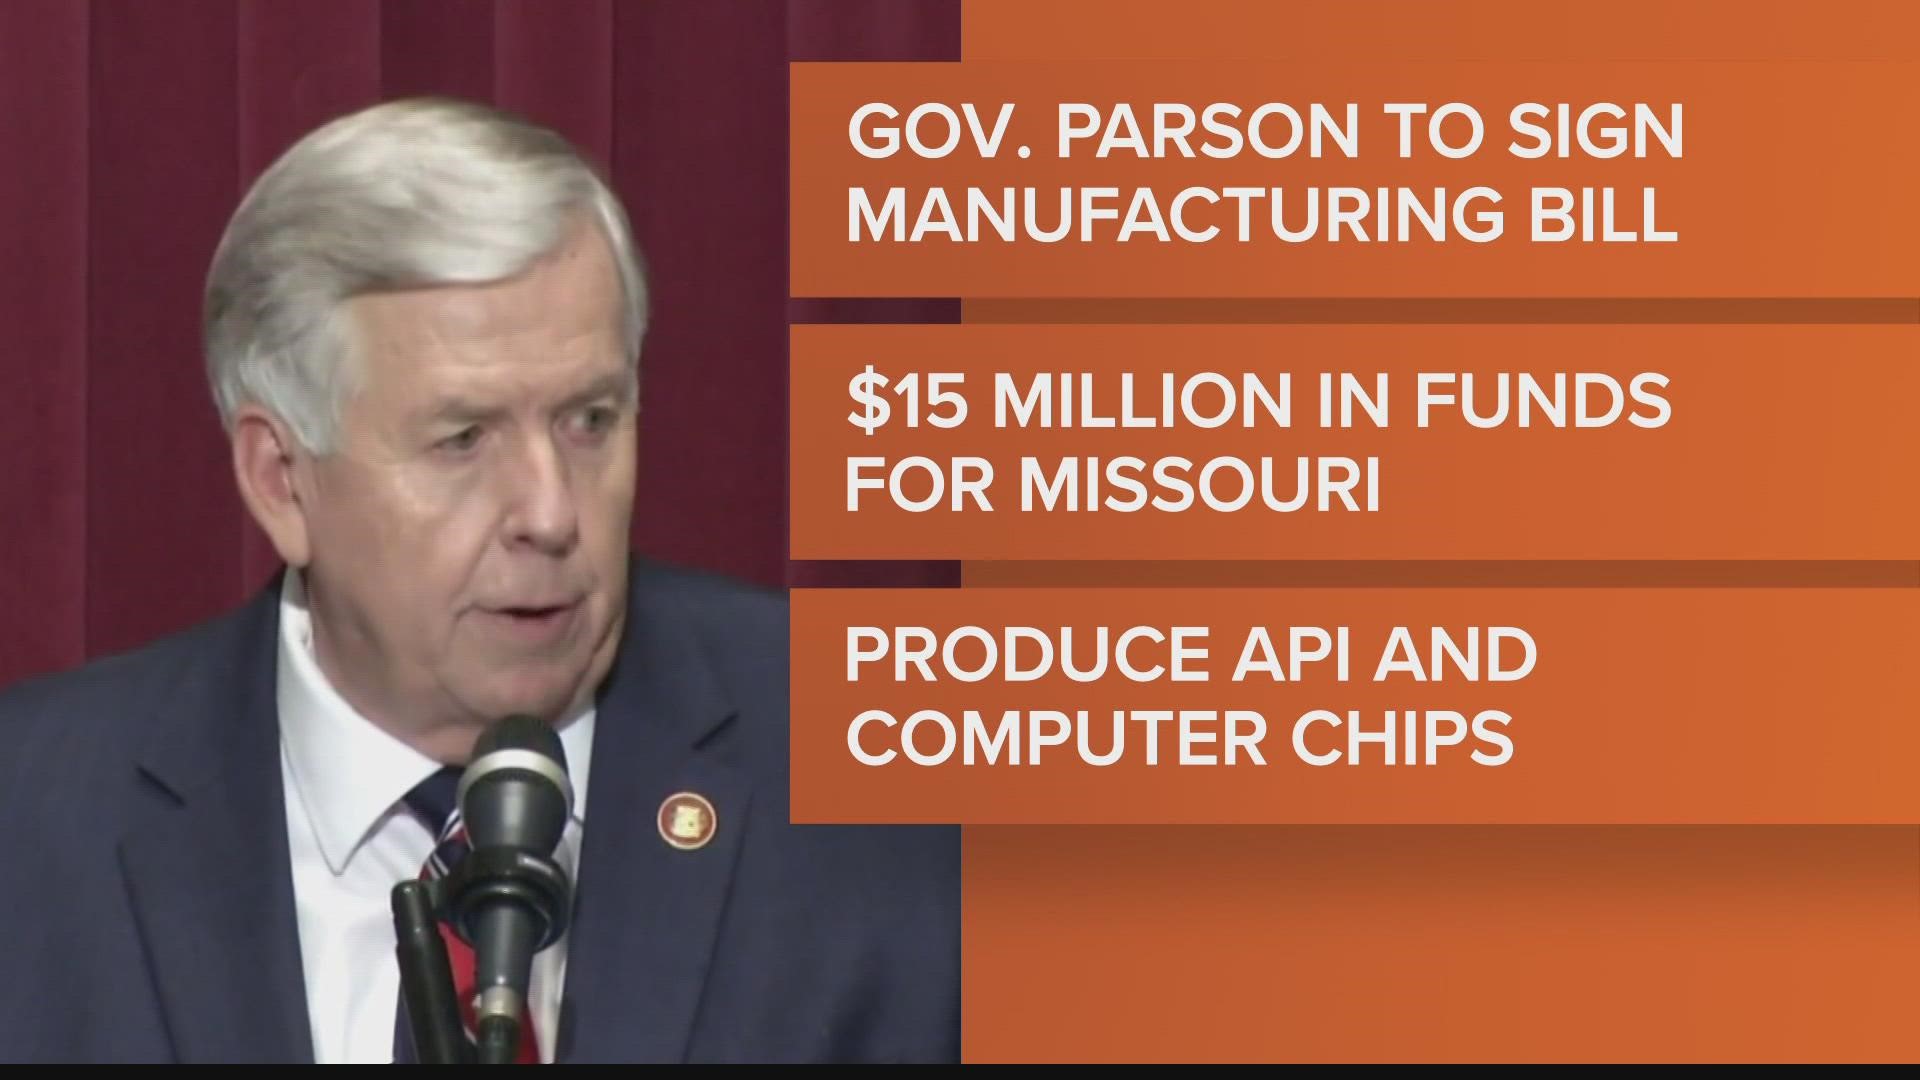 Thursday morning, Gov. Mike Parson will sign a multi-million dollar deal that will make Missouri a key player in revamping two areas of U.S. production.